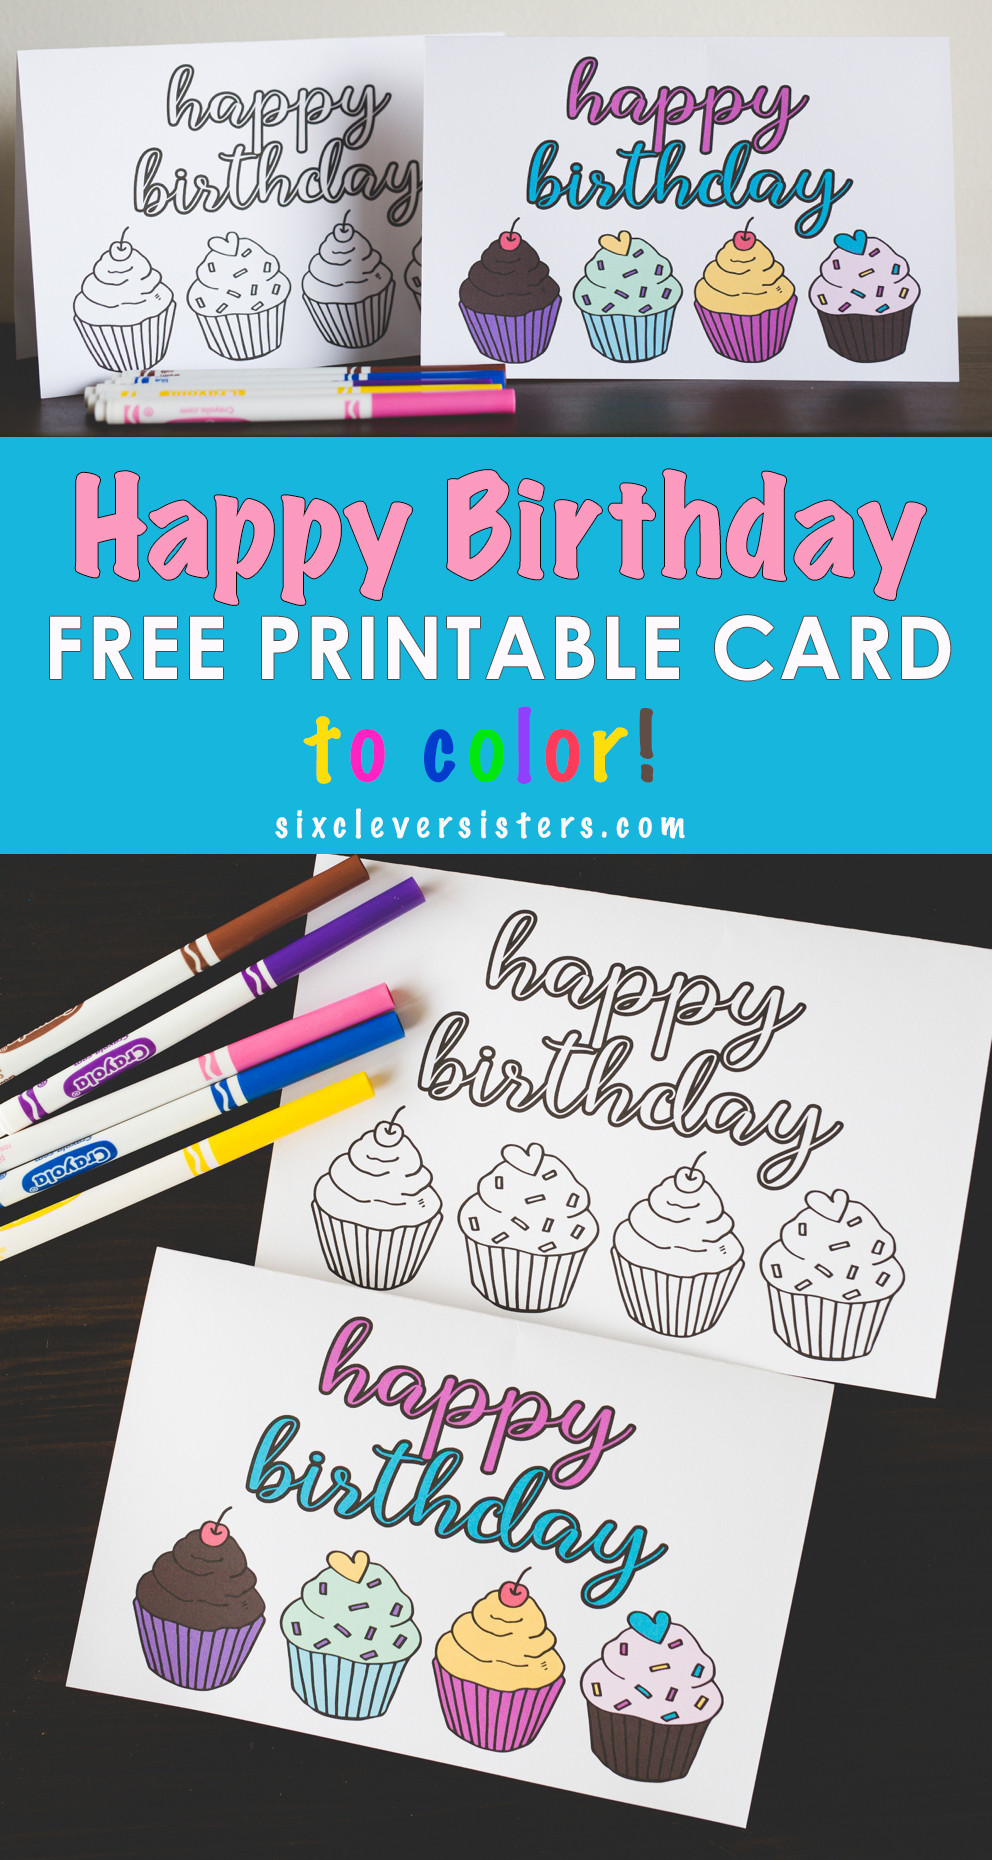 Printable Birthday Cards
 FREE Printable Happy Birthday Card Six Clever Sisters